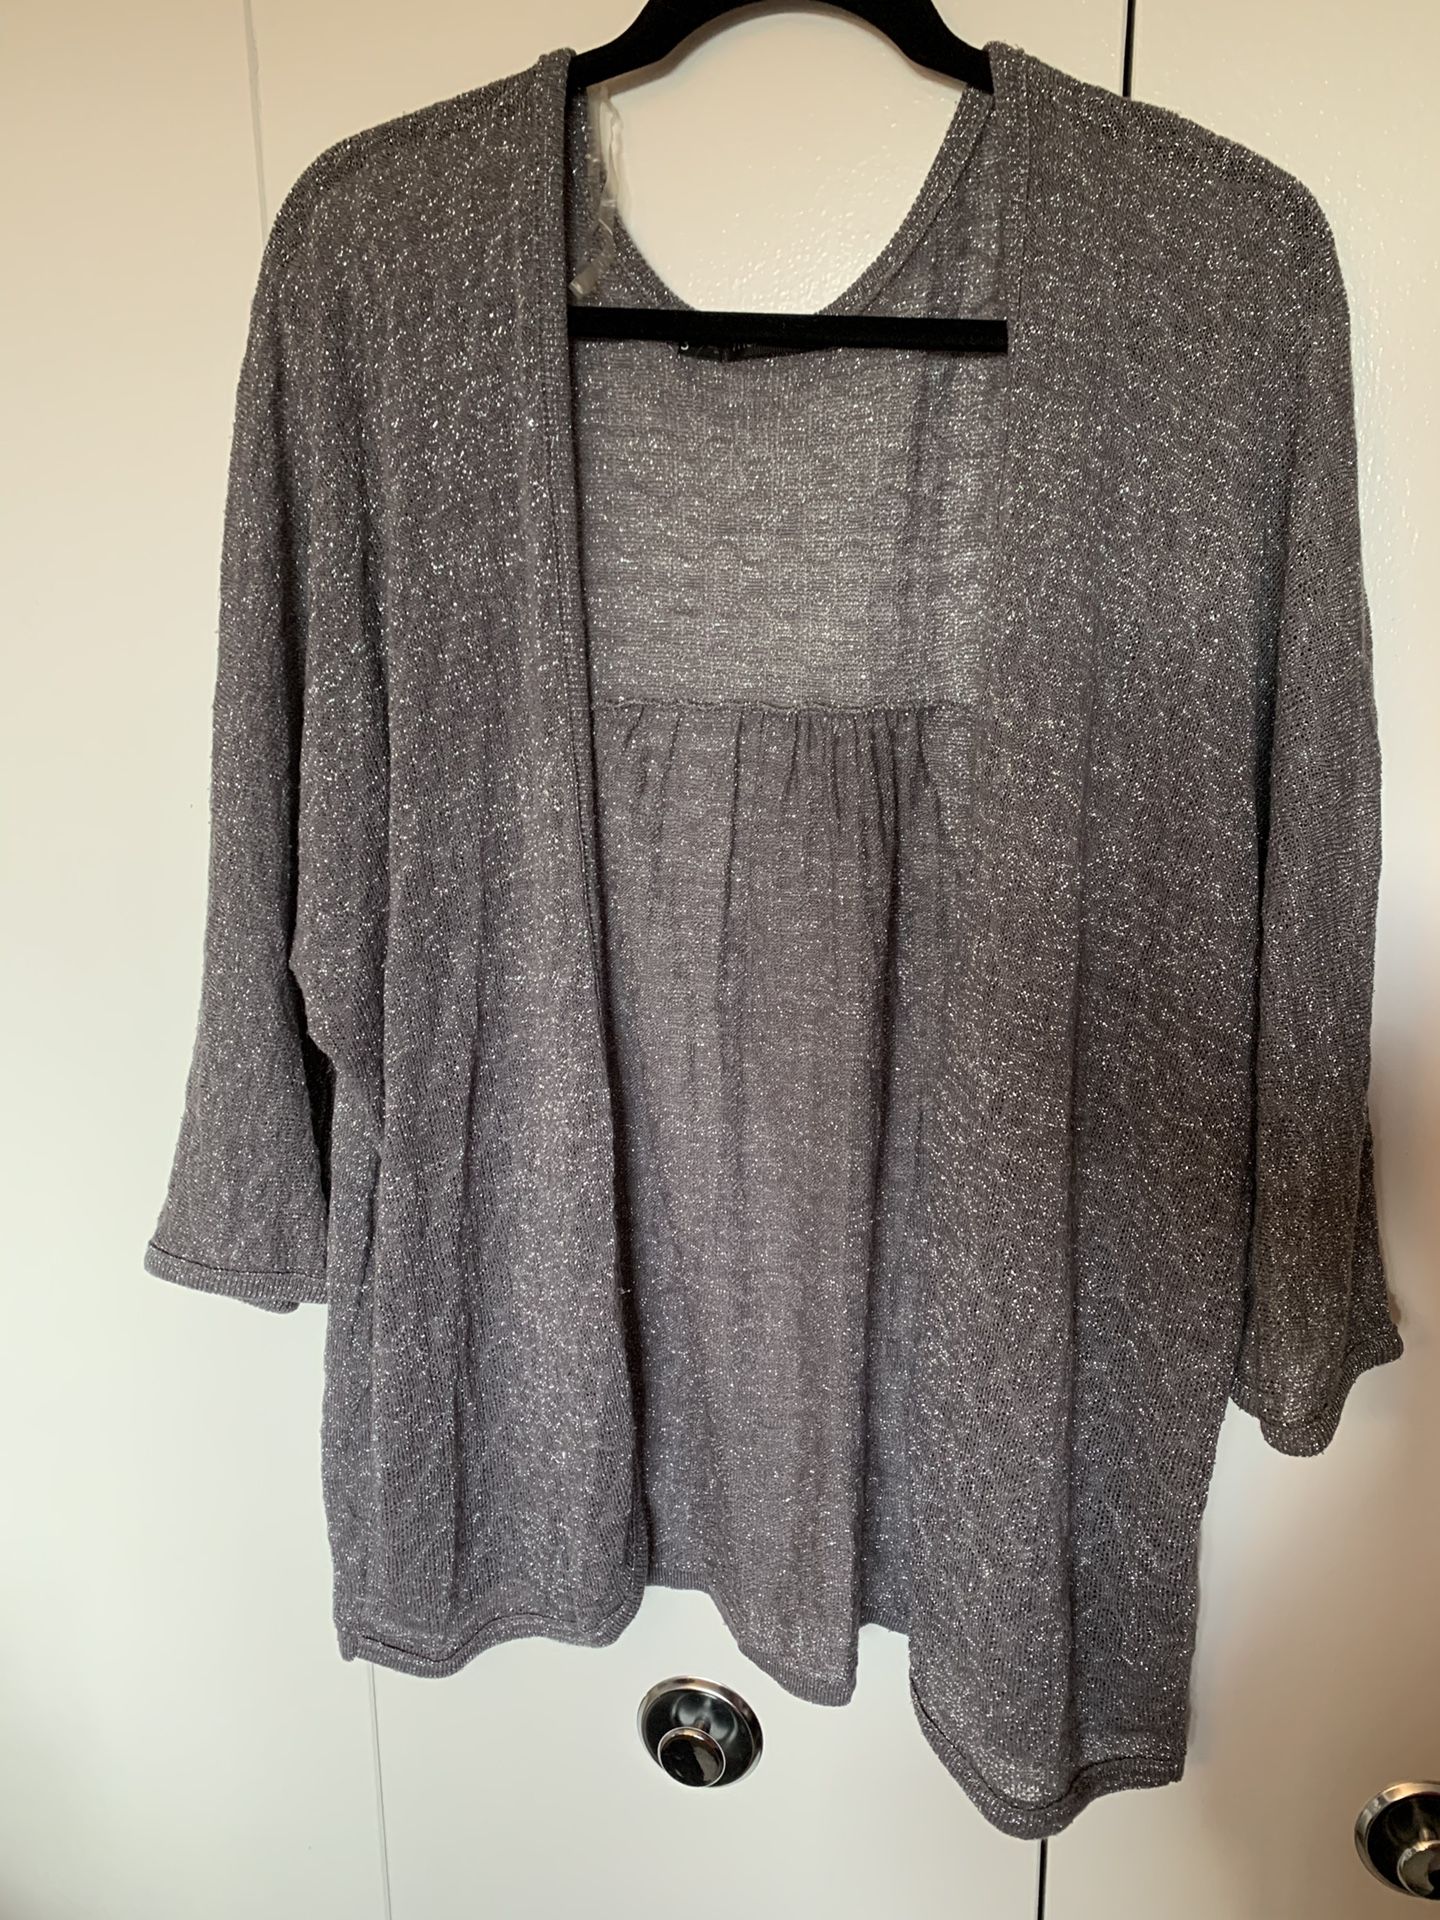 Maurices Plus Size Gray/Silver cardigan